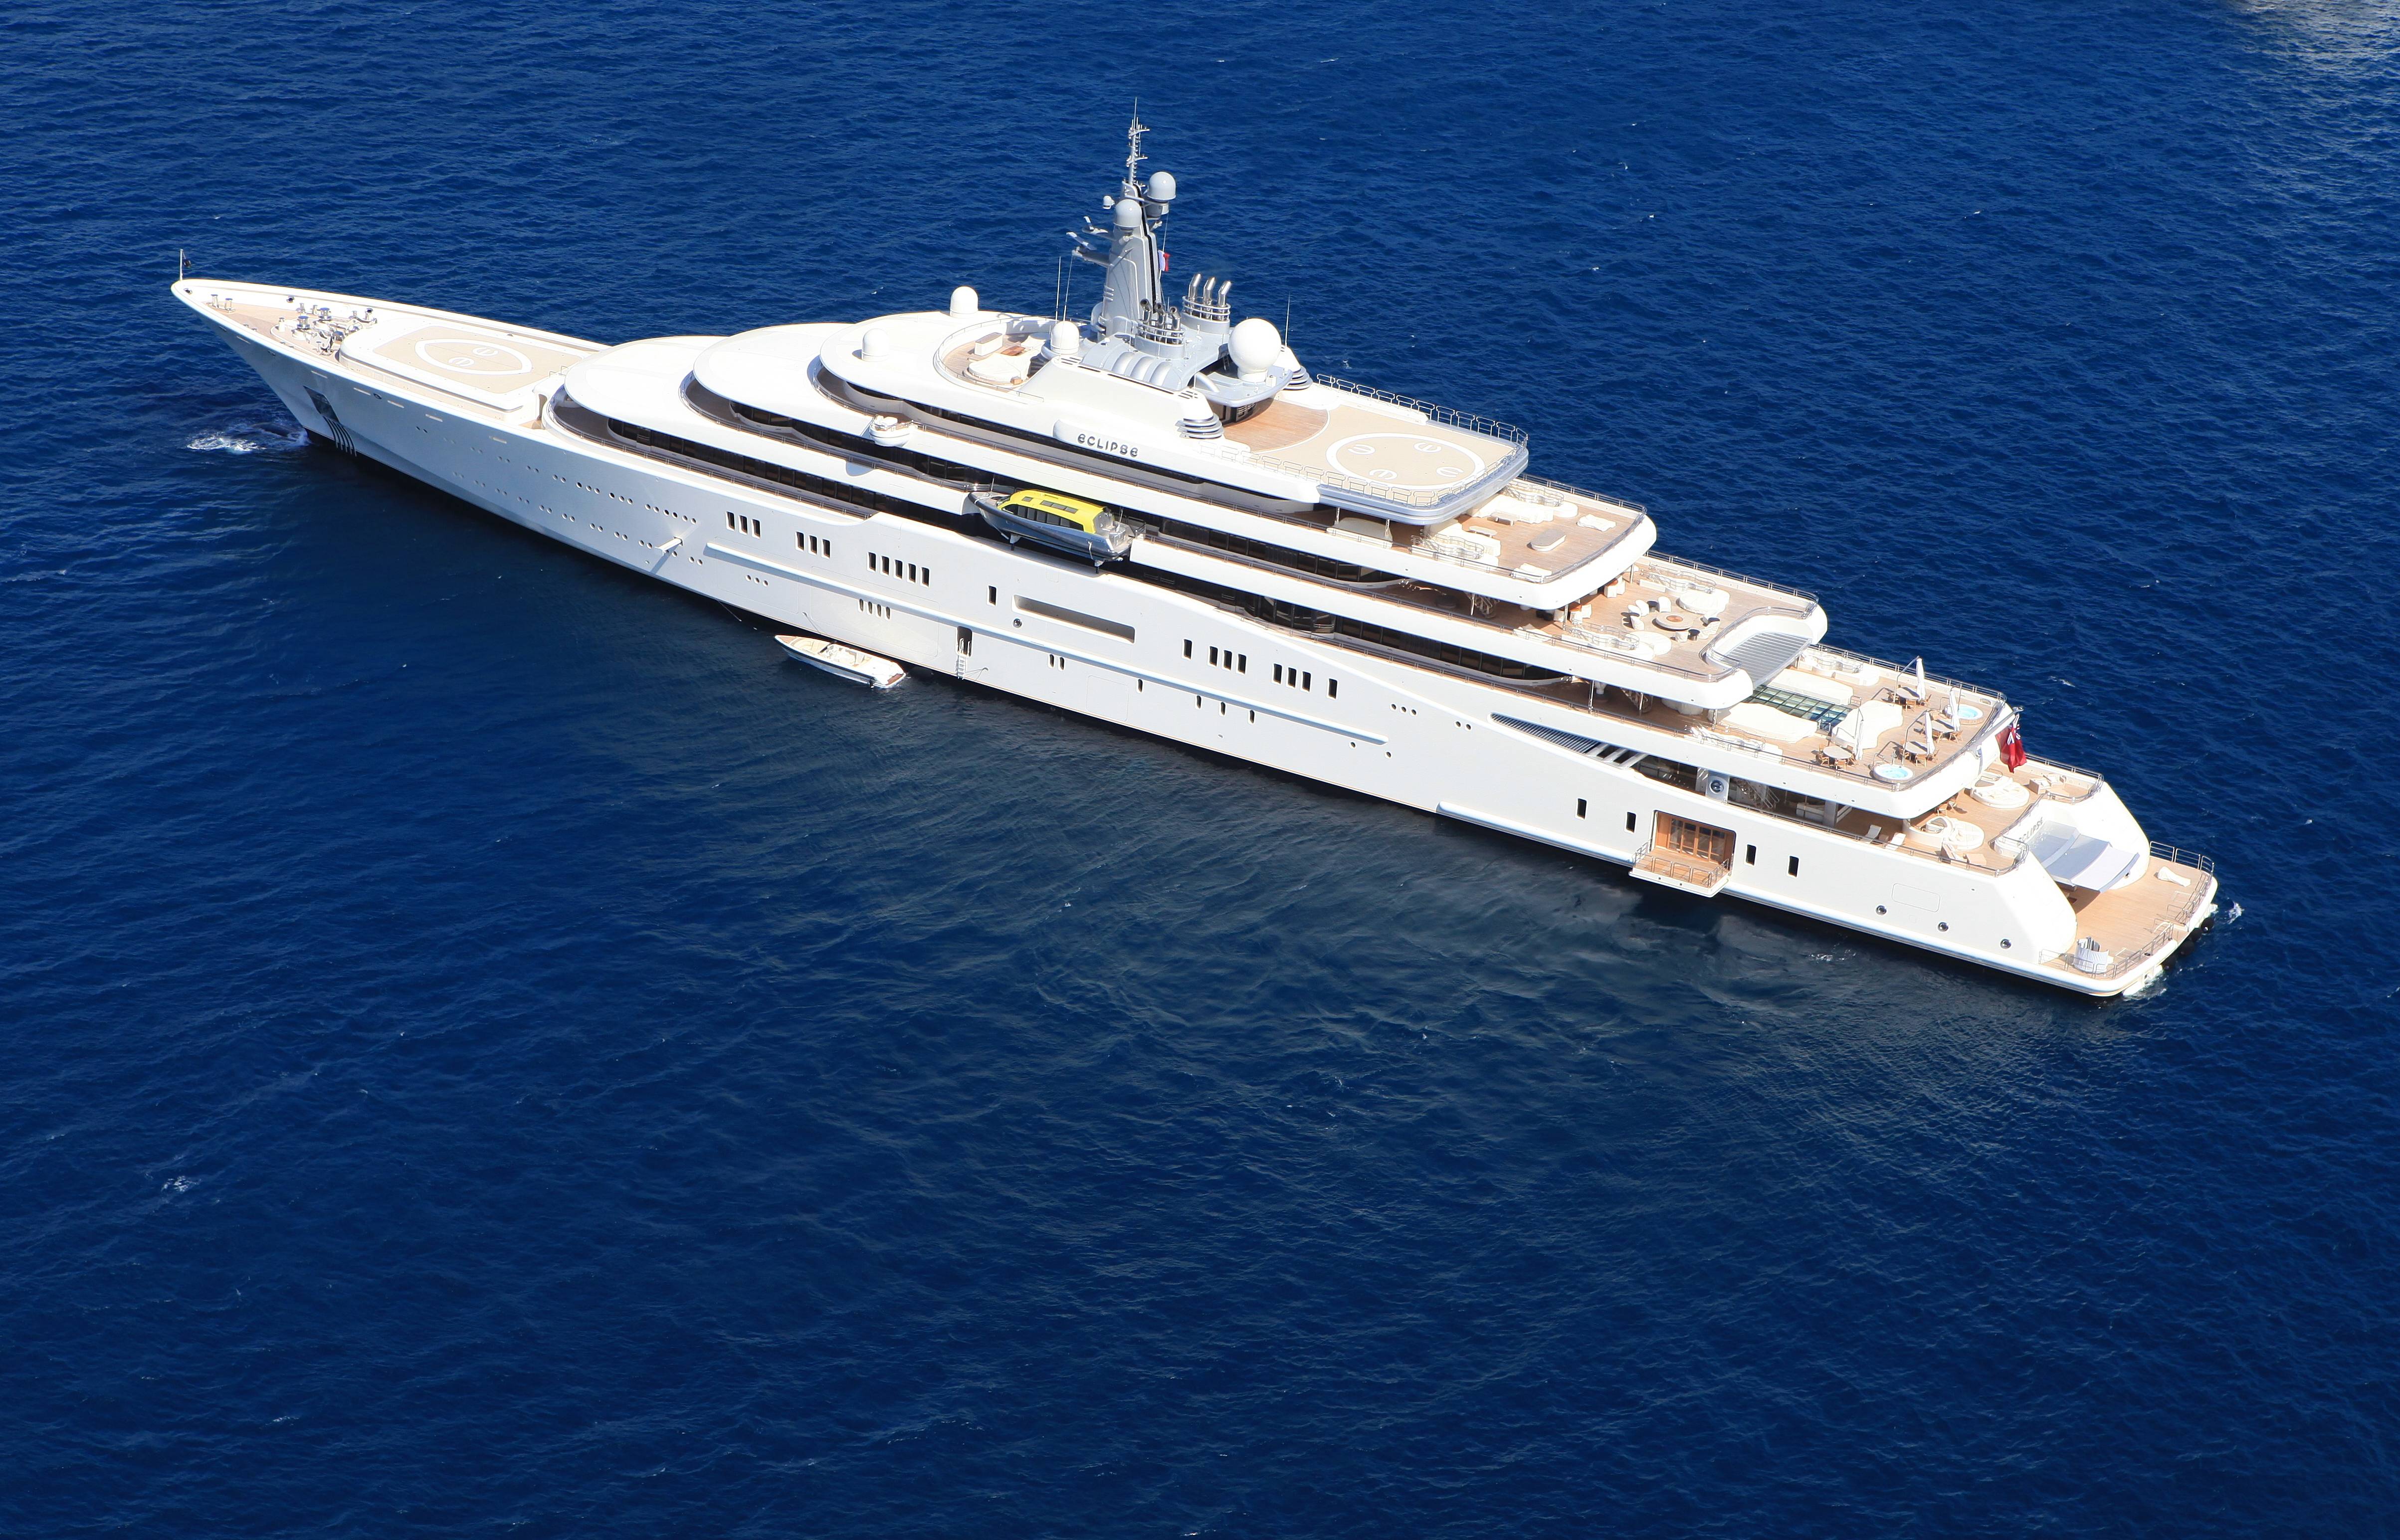 Most Expensive Private Boat/Yacht: Eclipse.
Price: $375,000,000.